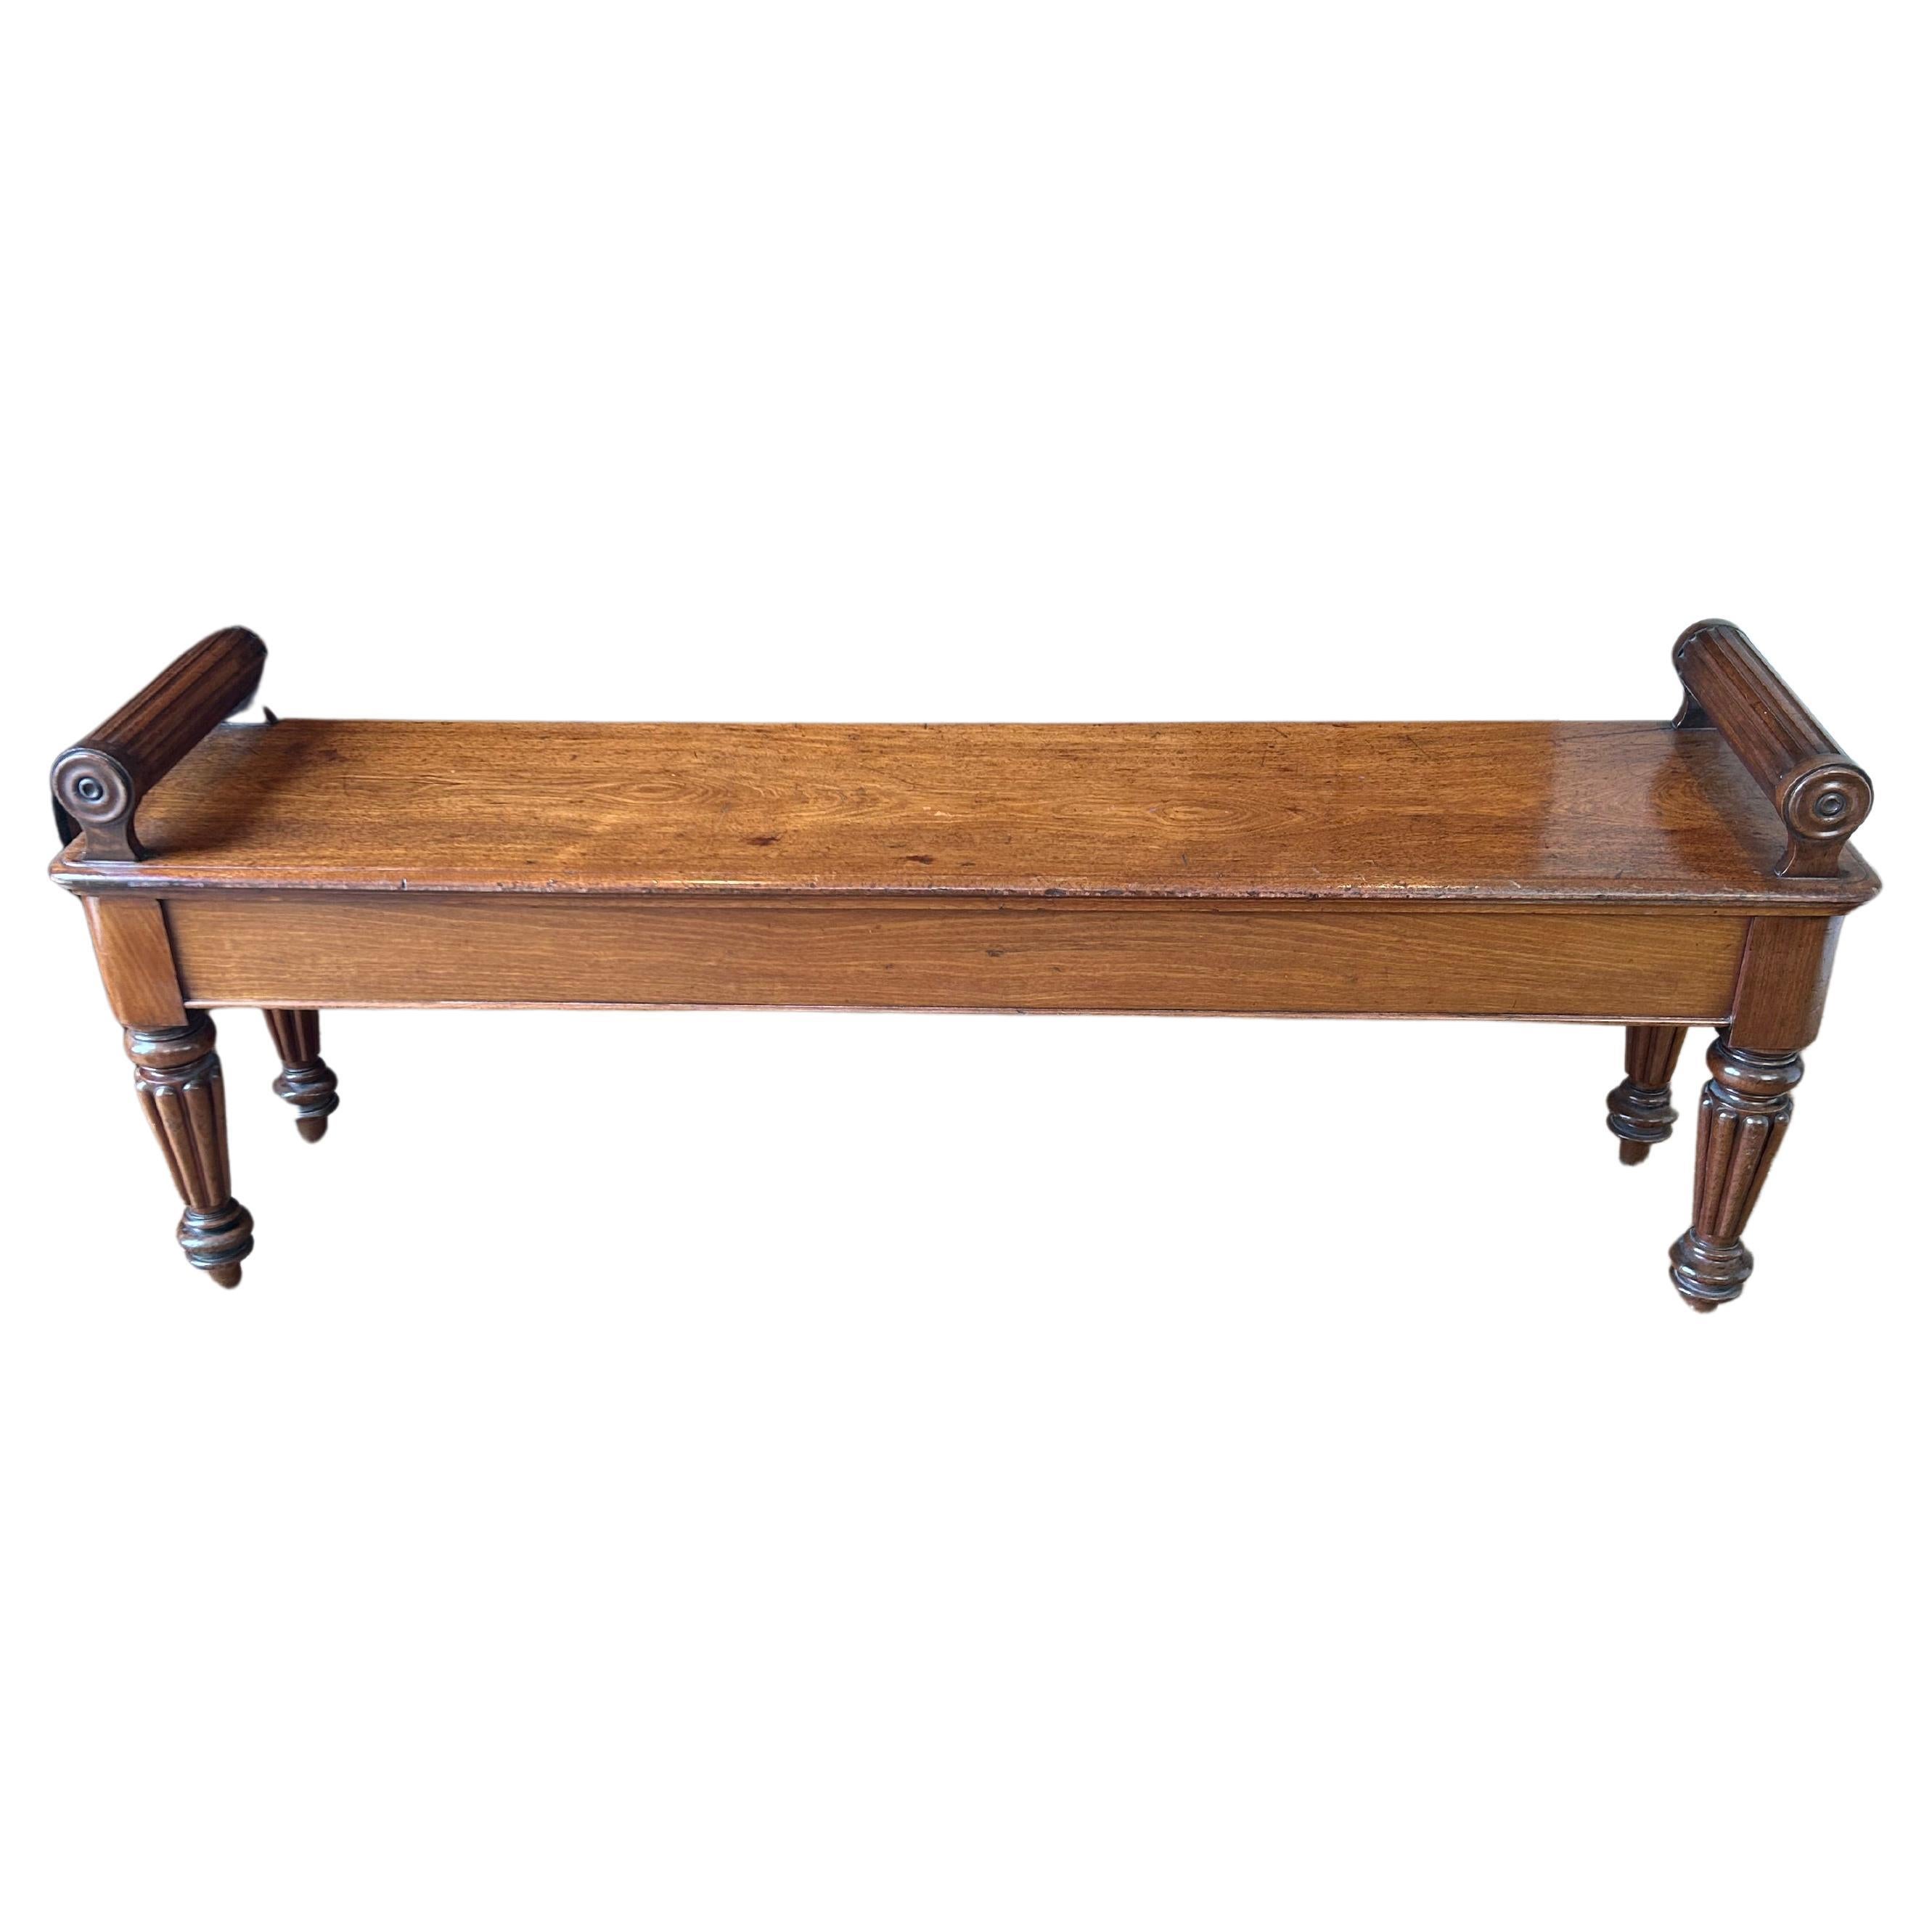 William lV Mahogany Hall bench in the manner of Gillows 